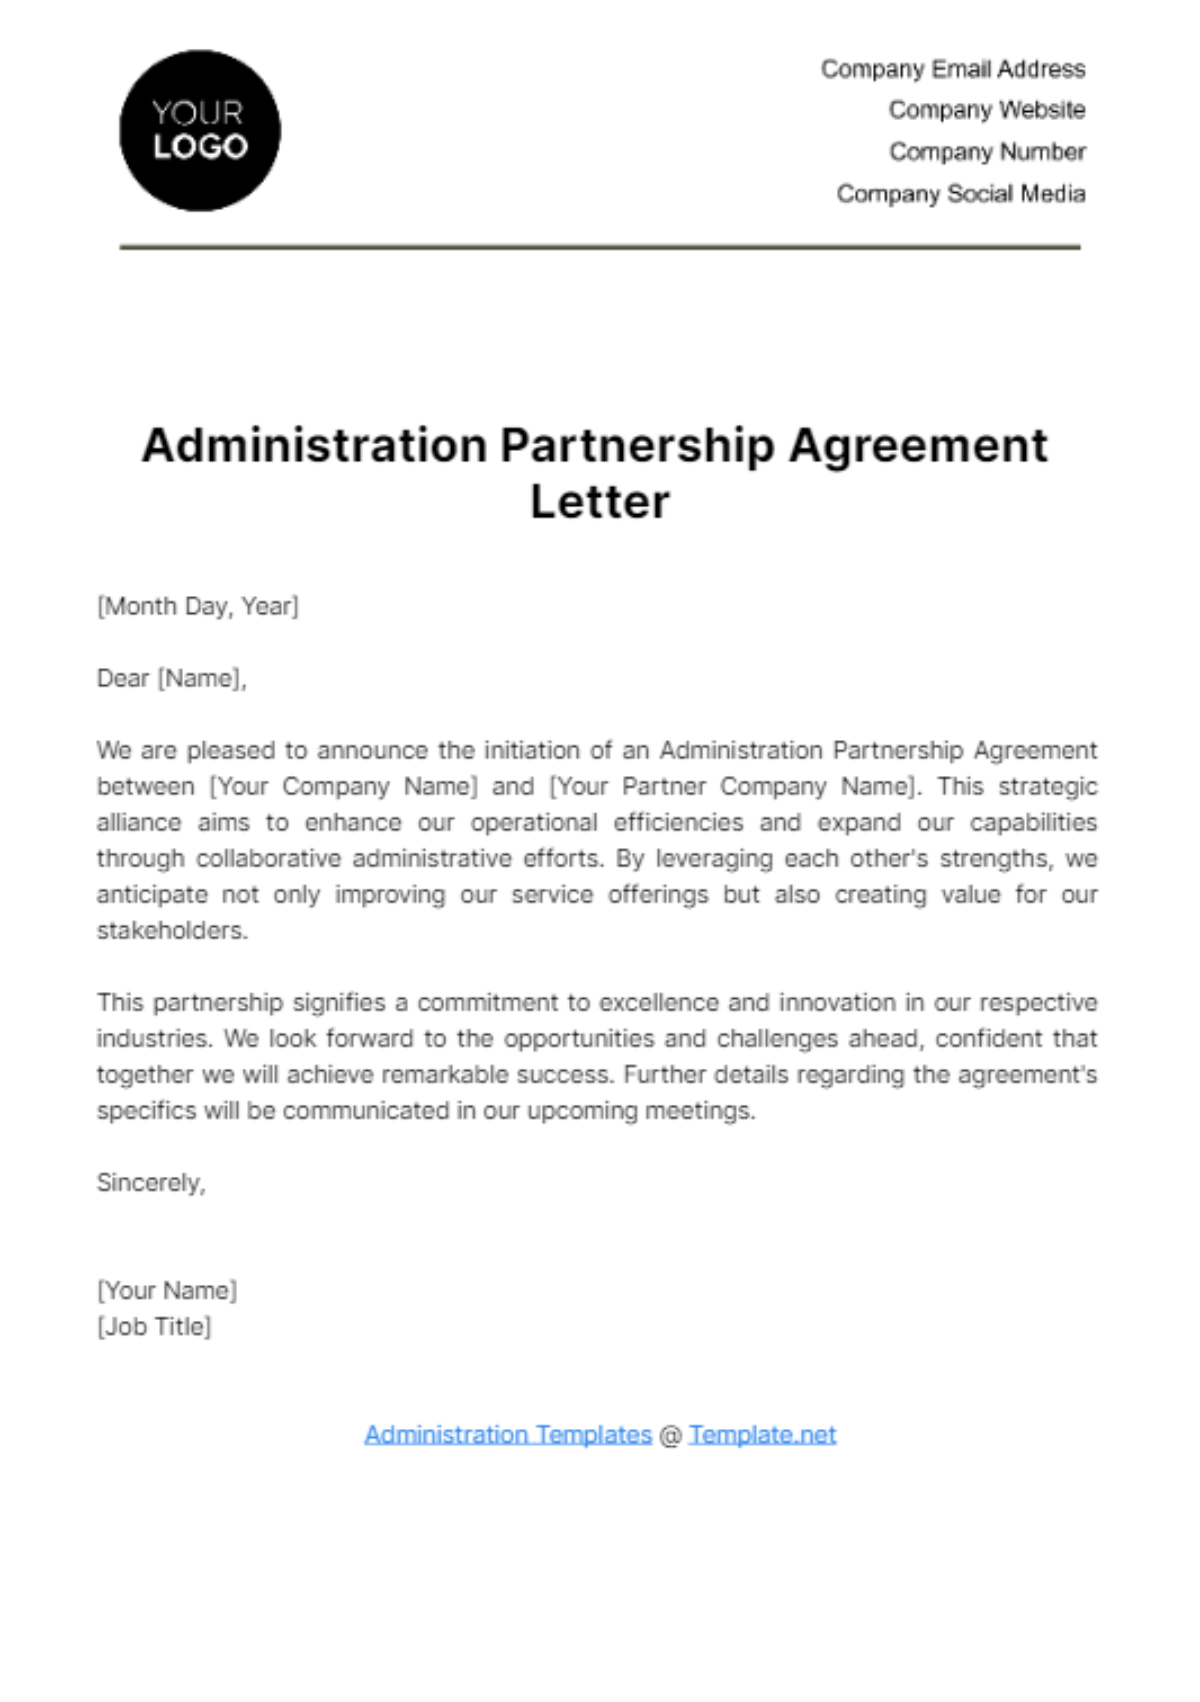 Administration Partnership Agreement Letter Template